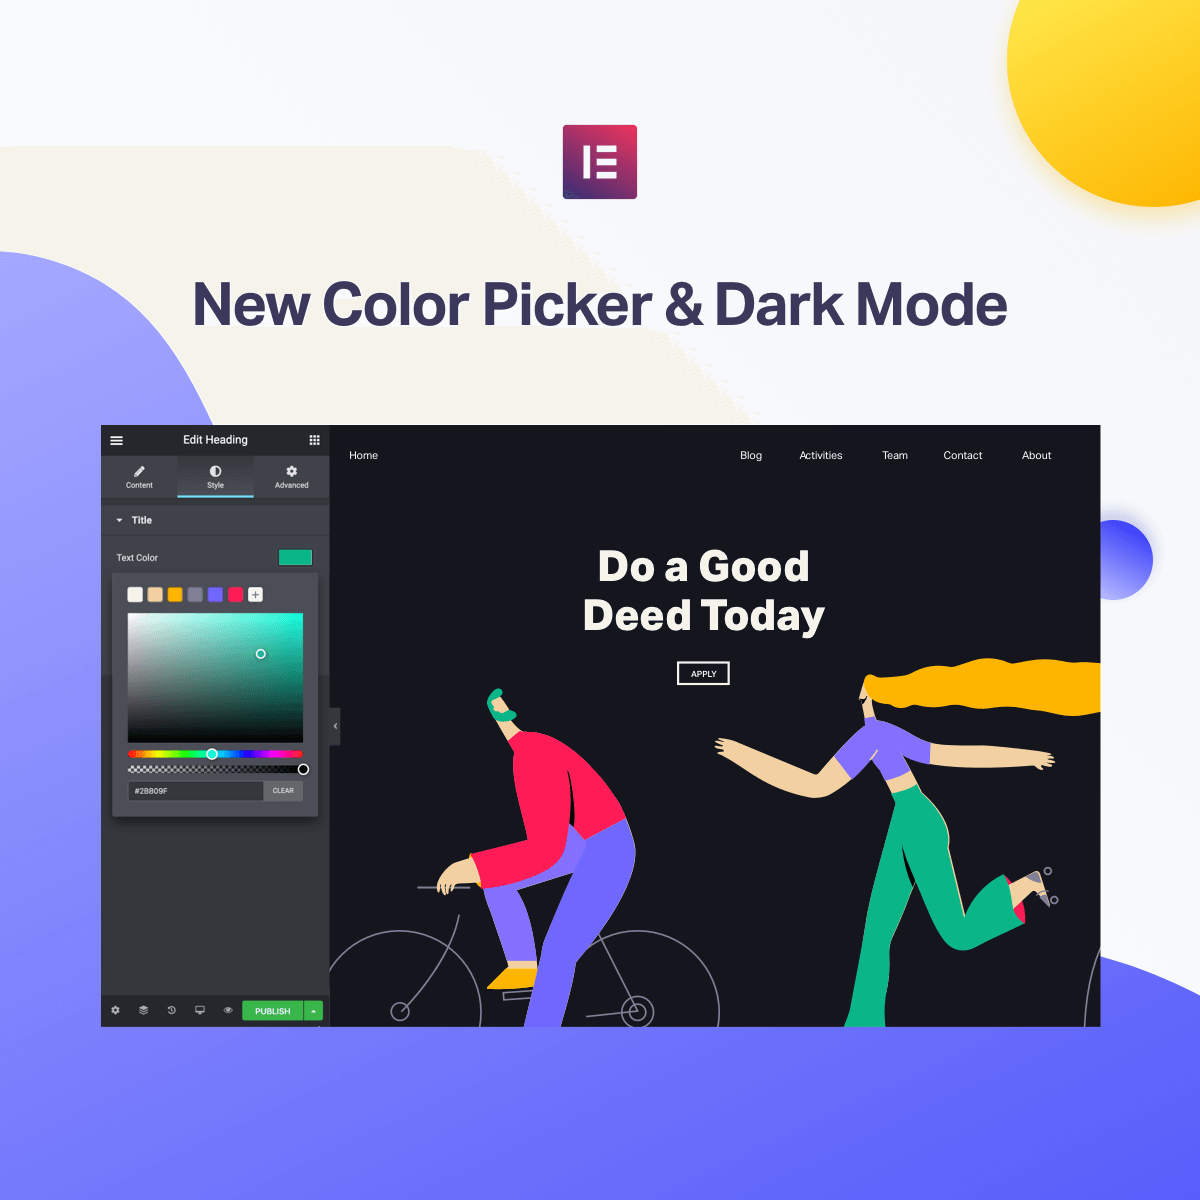 Introducing New Color Picker & Dark Mode